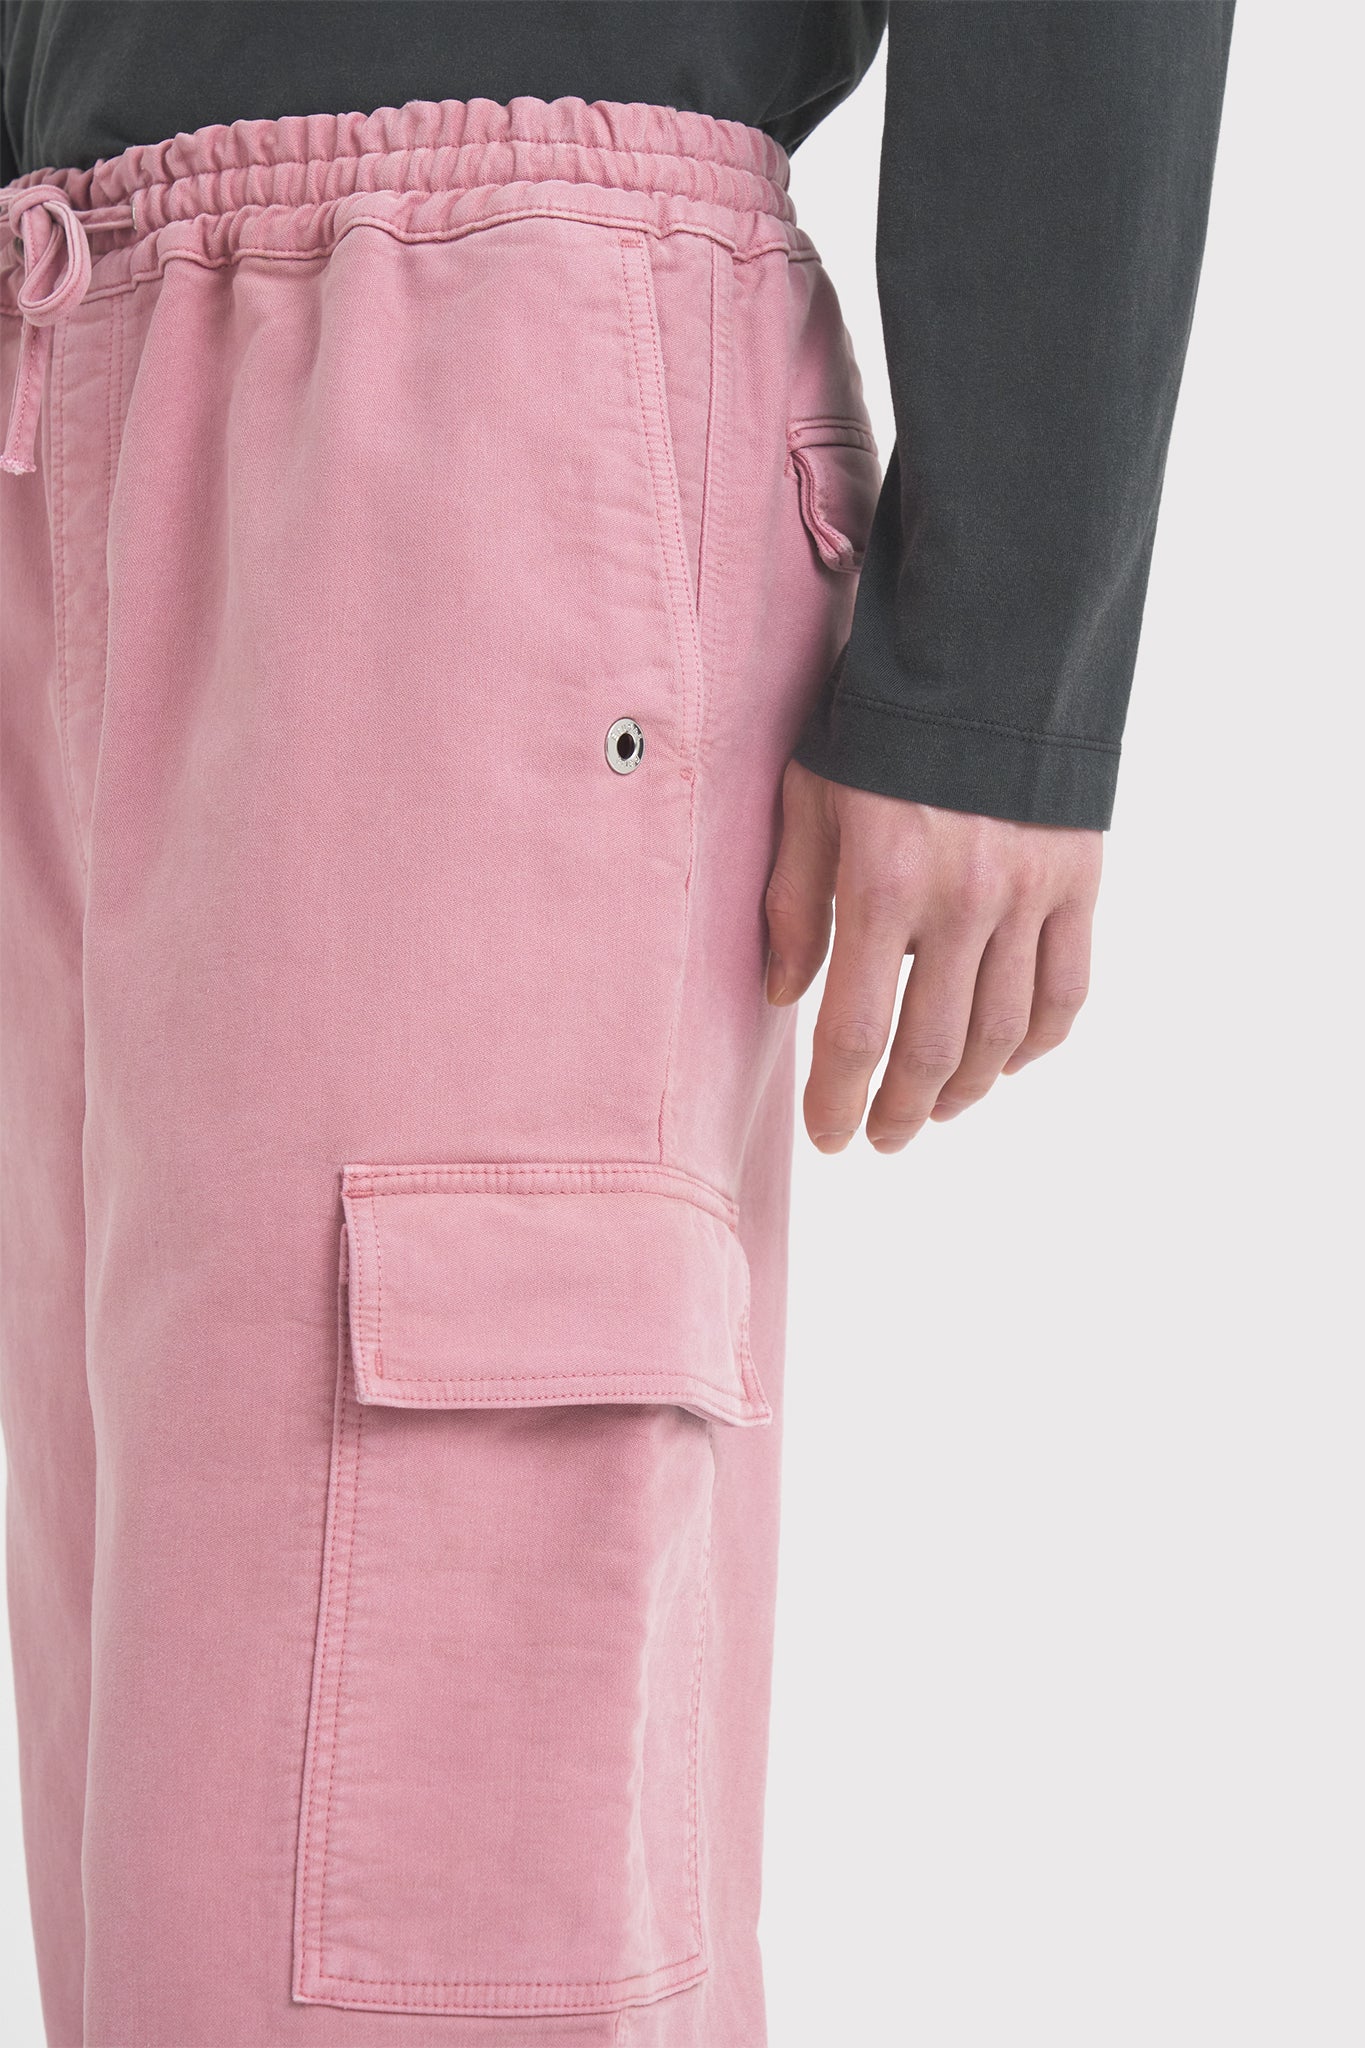 ÉTUDES FORUM TWILL DYED PINK TROUSERS 5